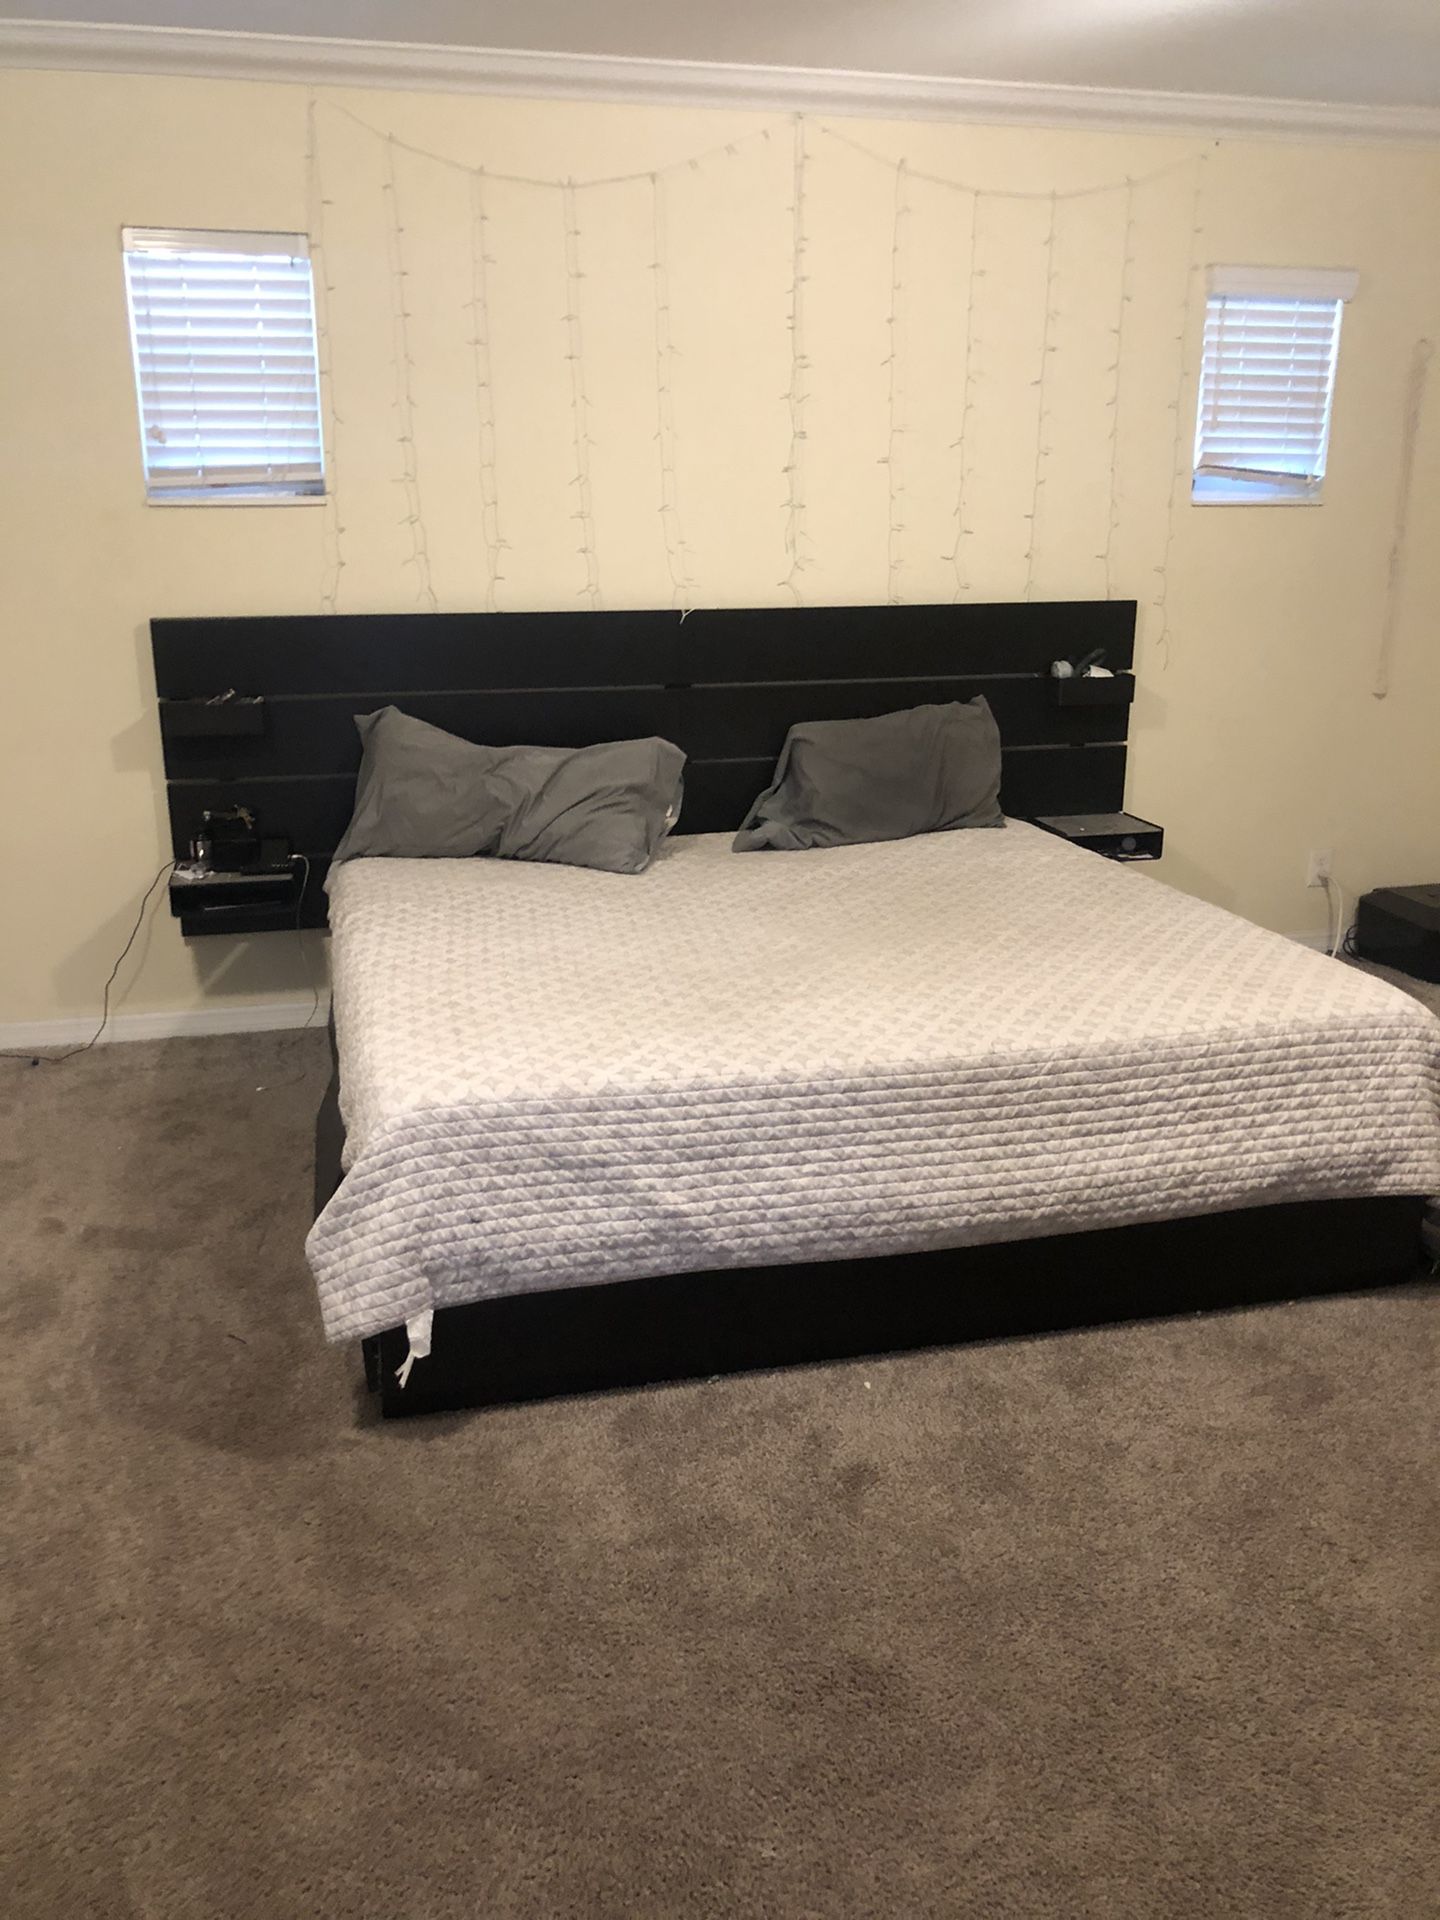 King size bed with drawers